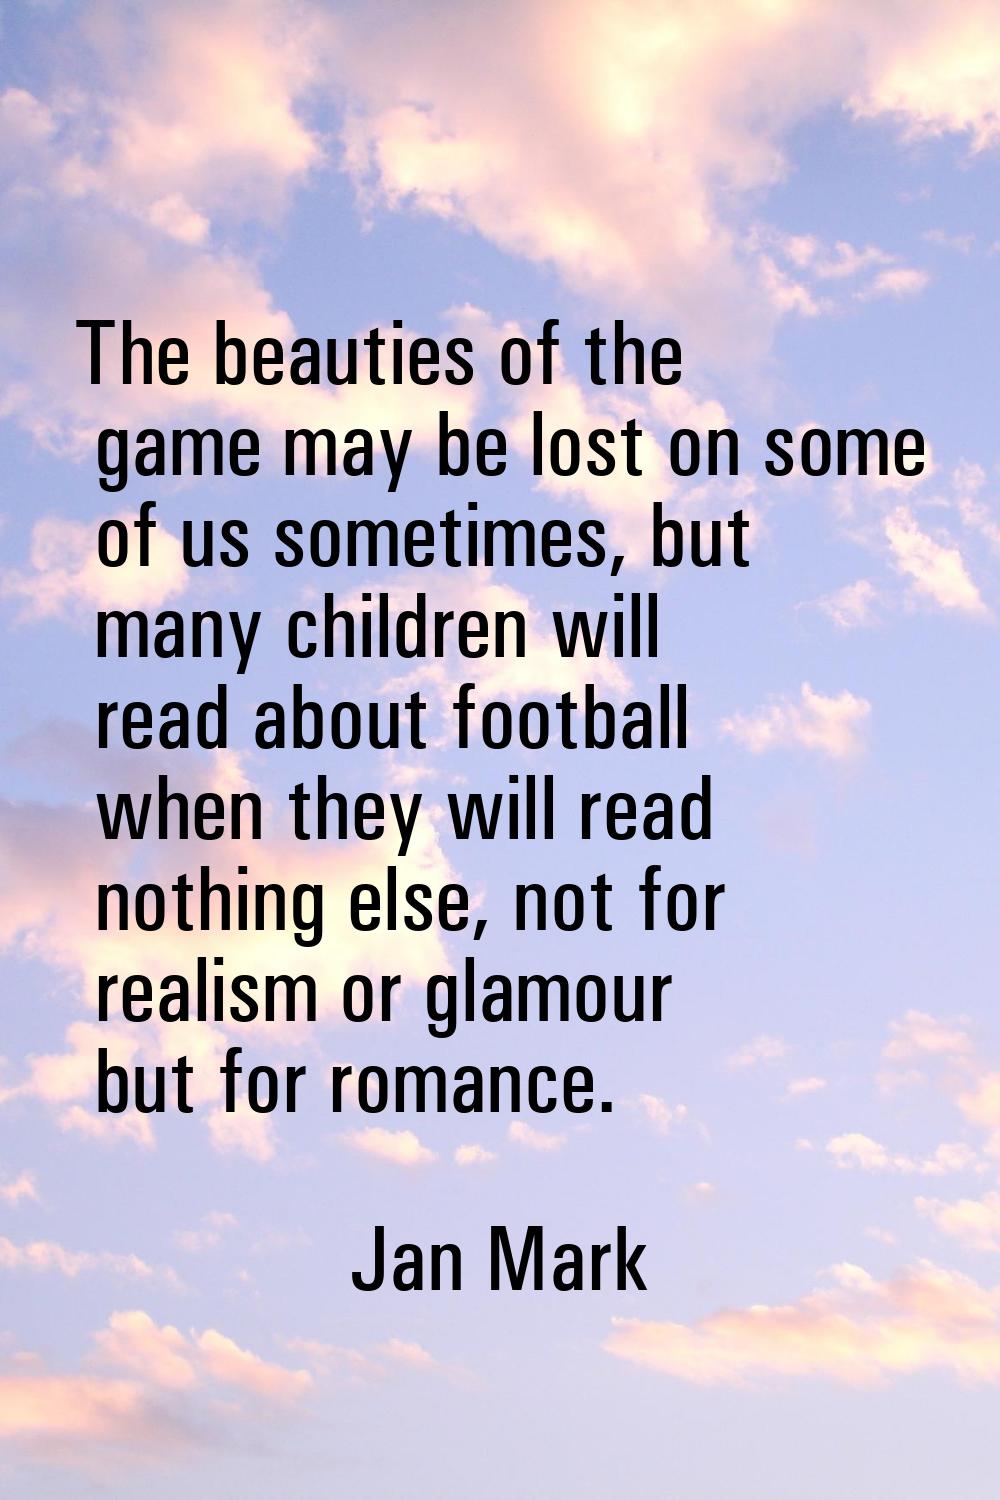 The beauties of the game may be lost on some of us sometimes, but many children will read about foo